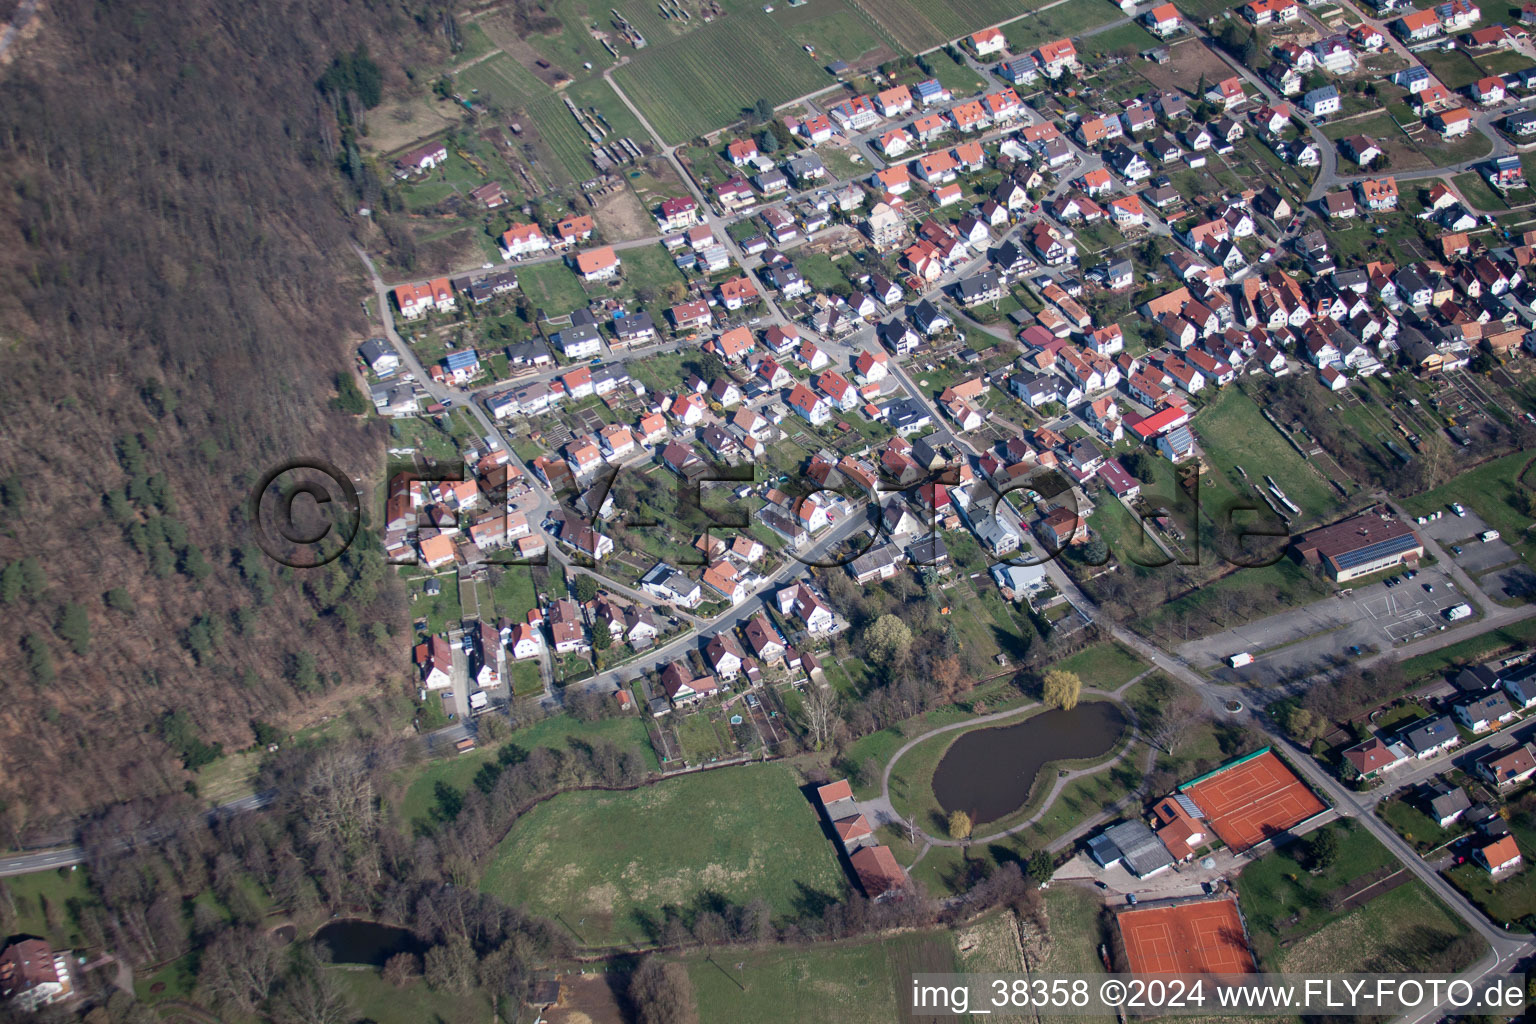 Aerial photograpy of Klingenmünster in the state Rhineland-Palatinate, Germany